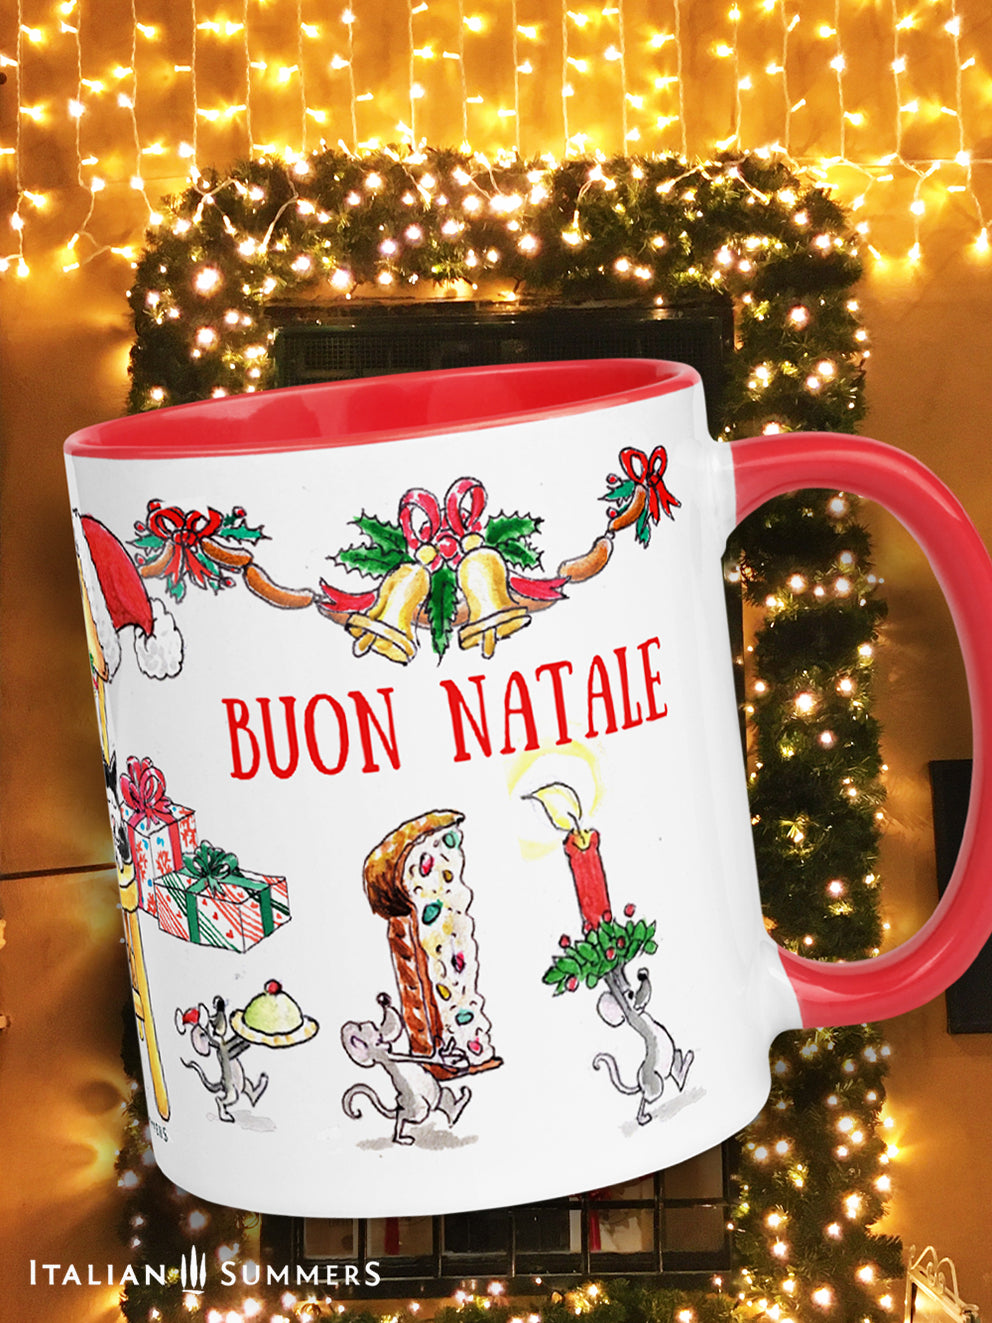 This Italian Christmas mug is a sight to see! Deck the halls with mugs and joy... this one comes complete with sketches of a sleeping cat plus three mice, merrily walking away with goodies from the table. It's sure to bring a smile to your face this holiday season!